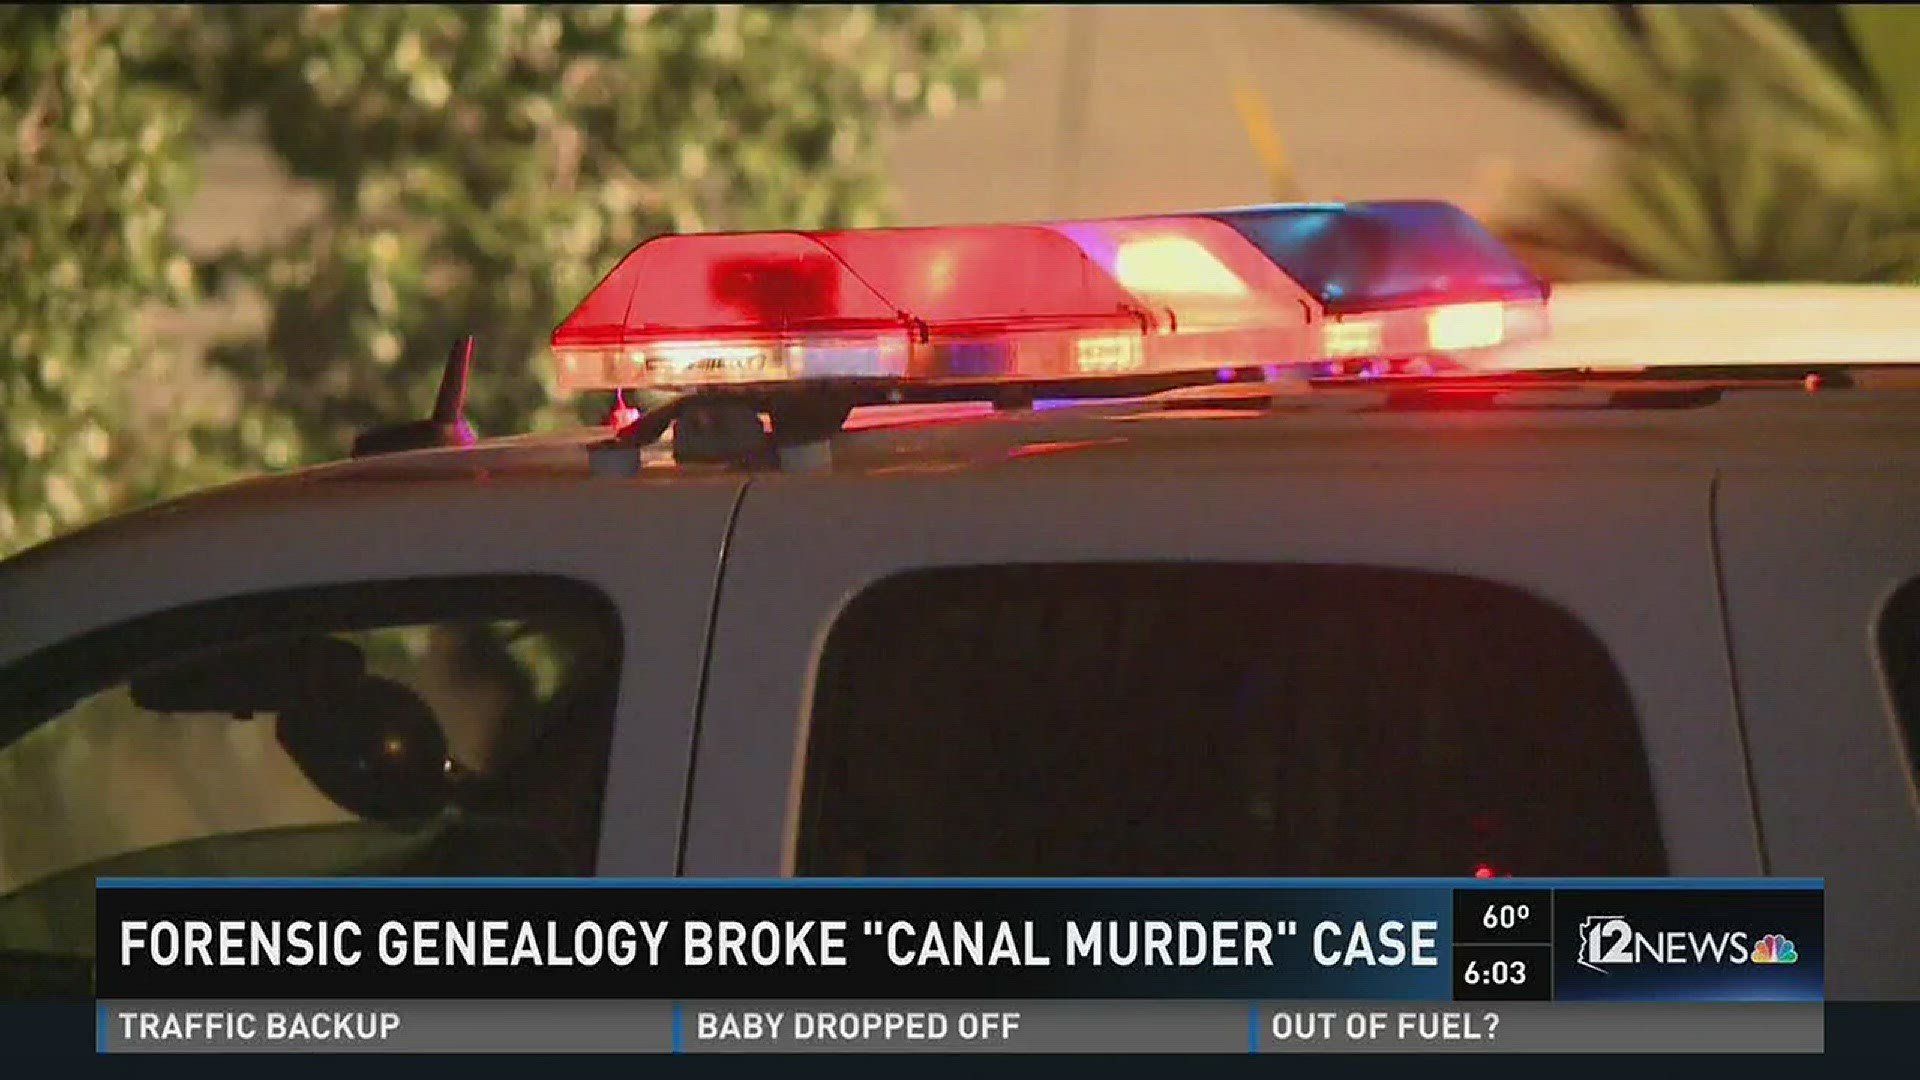 How DNA and genealogy helped solve the 'Canal Murder' case.